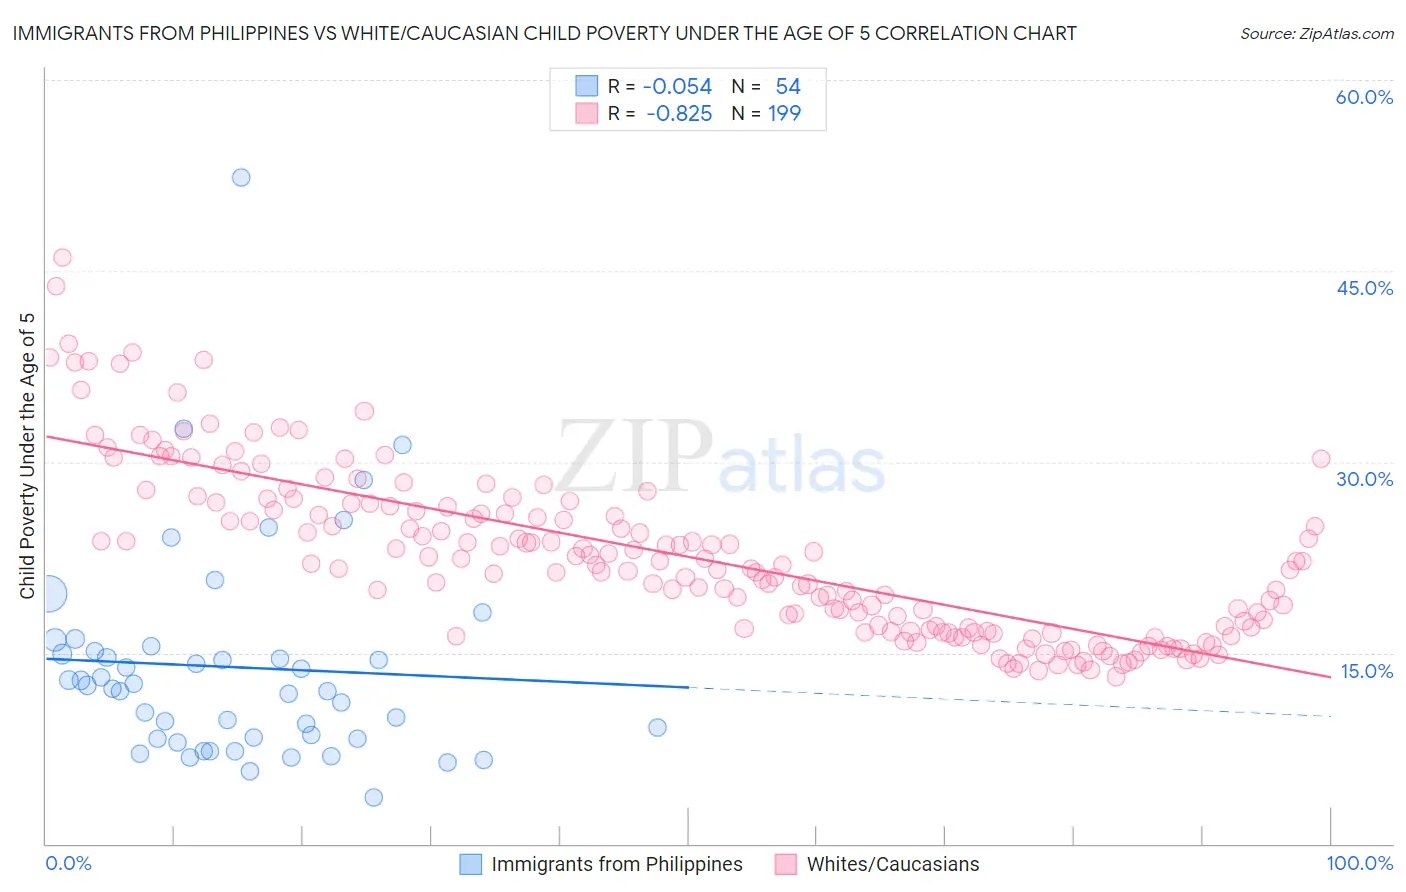 Immigrants from Philippines vs White/Caucasian Child Poverty Under the Age of 5